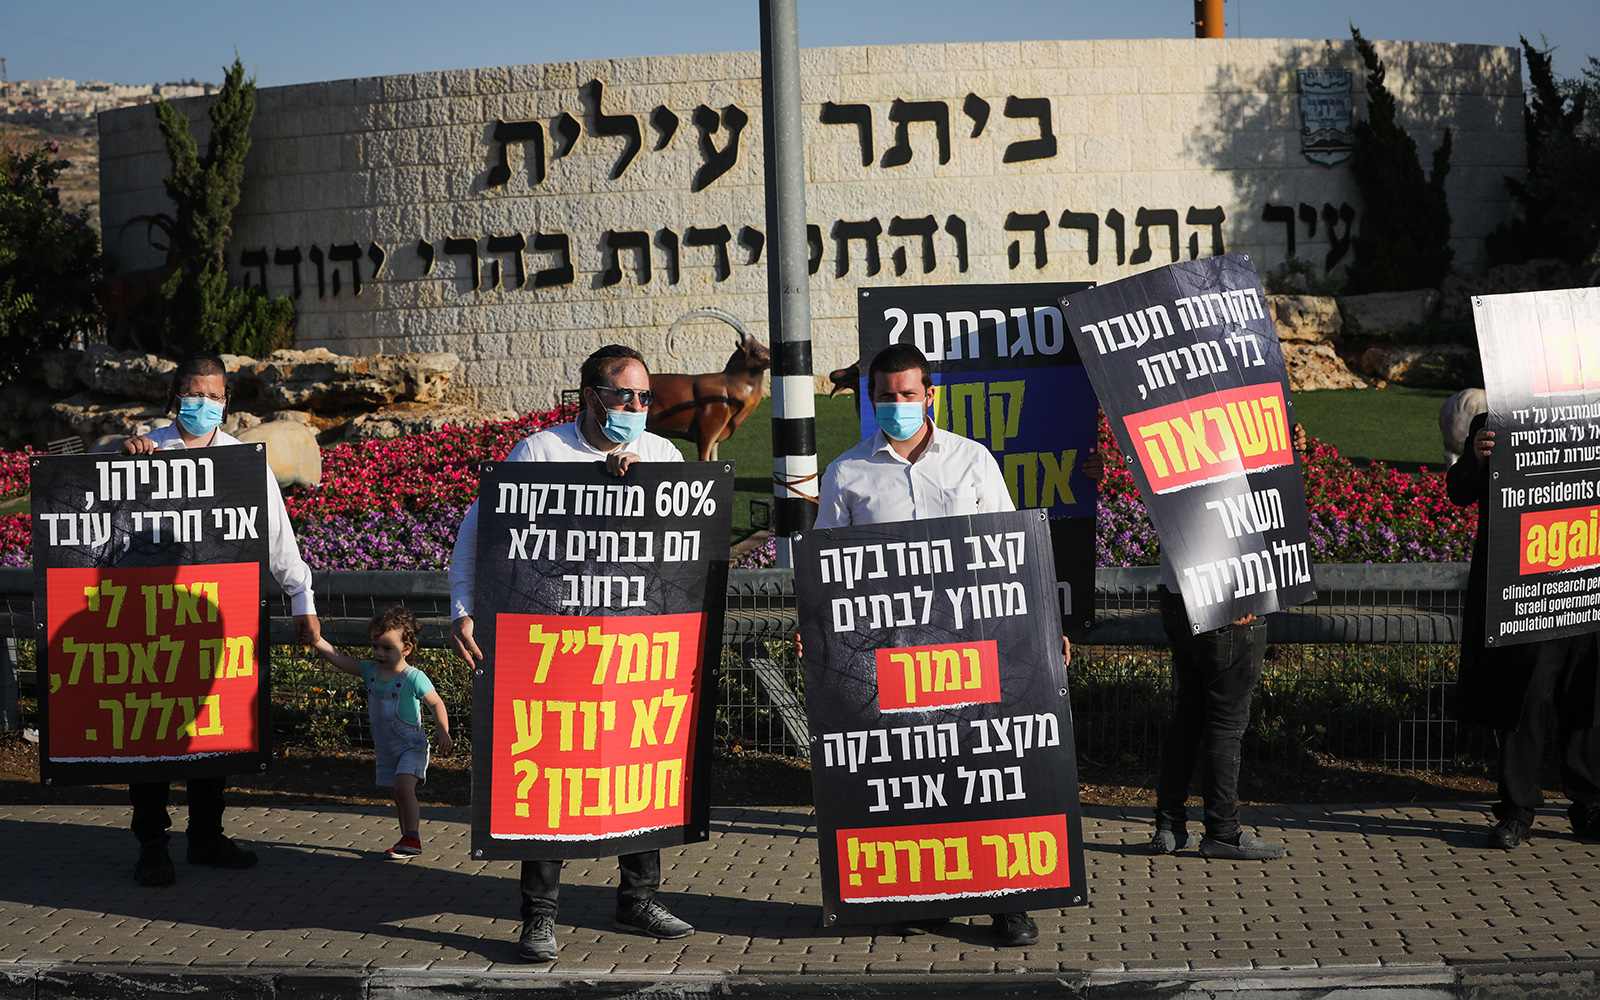 Beitar Illit residents protest against a lockdown of the city at its entrance, July 8, 2020. (Nati Shohat/Flash90)